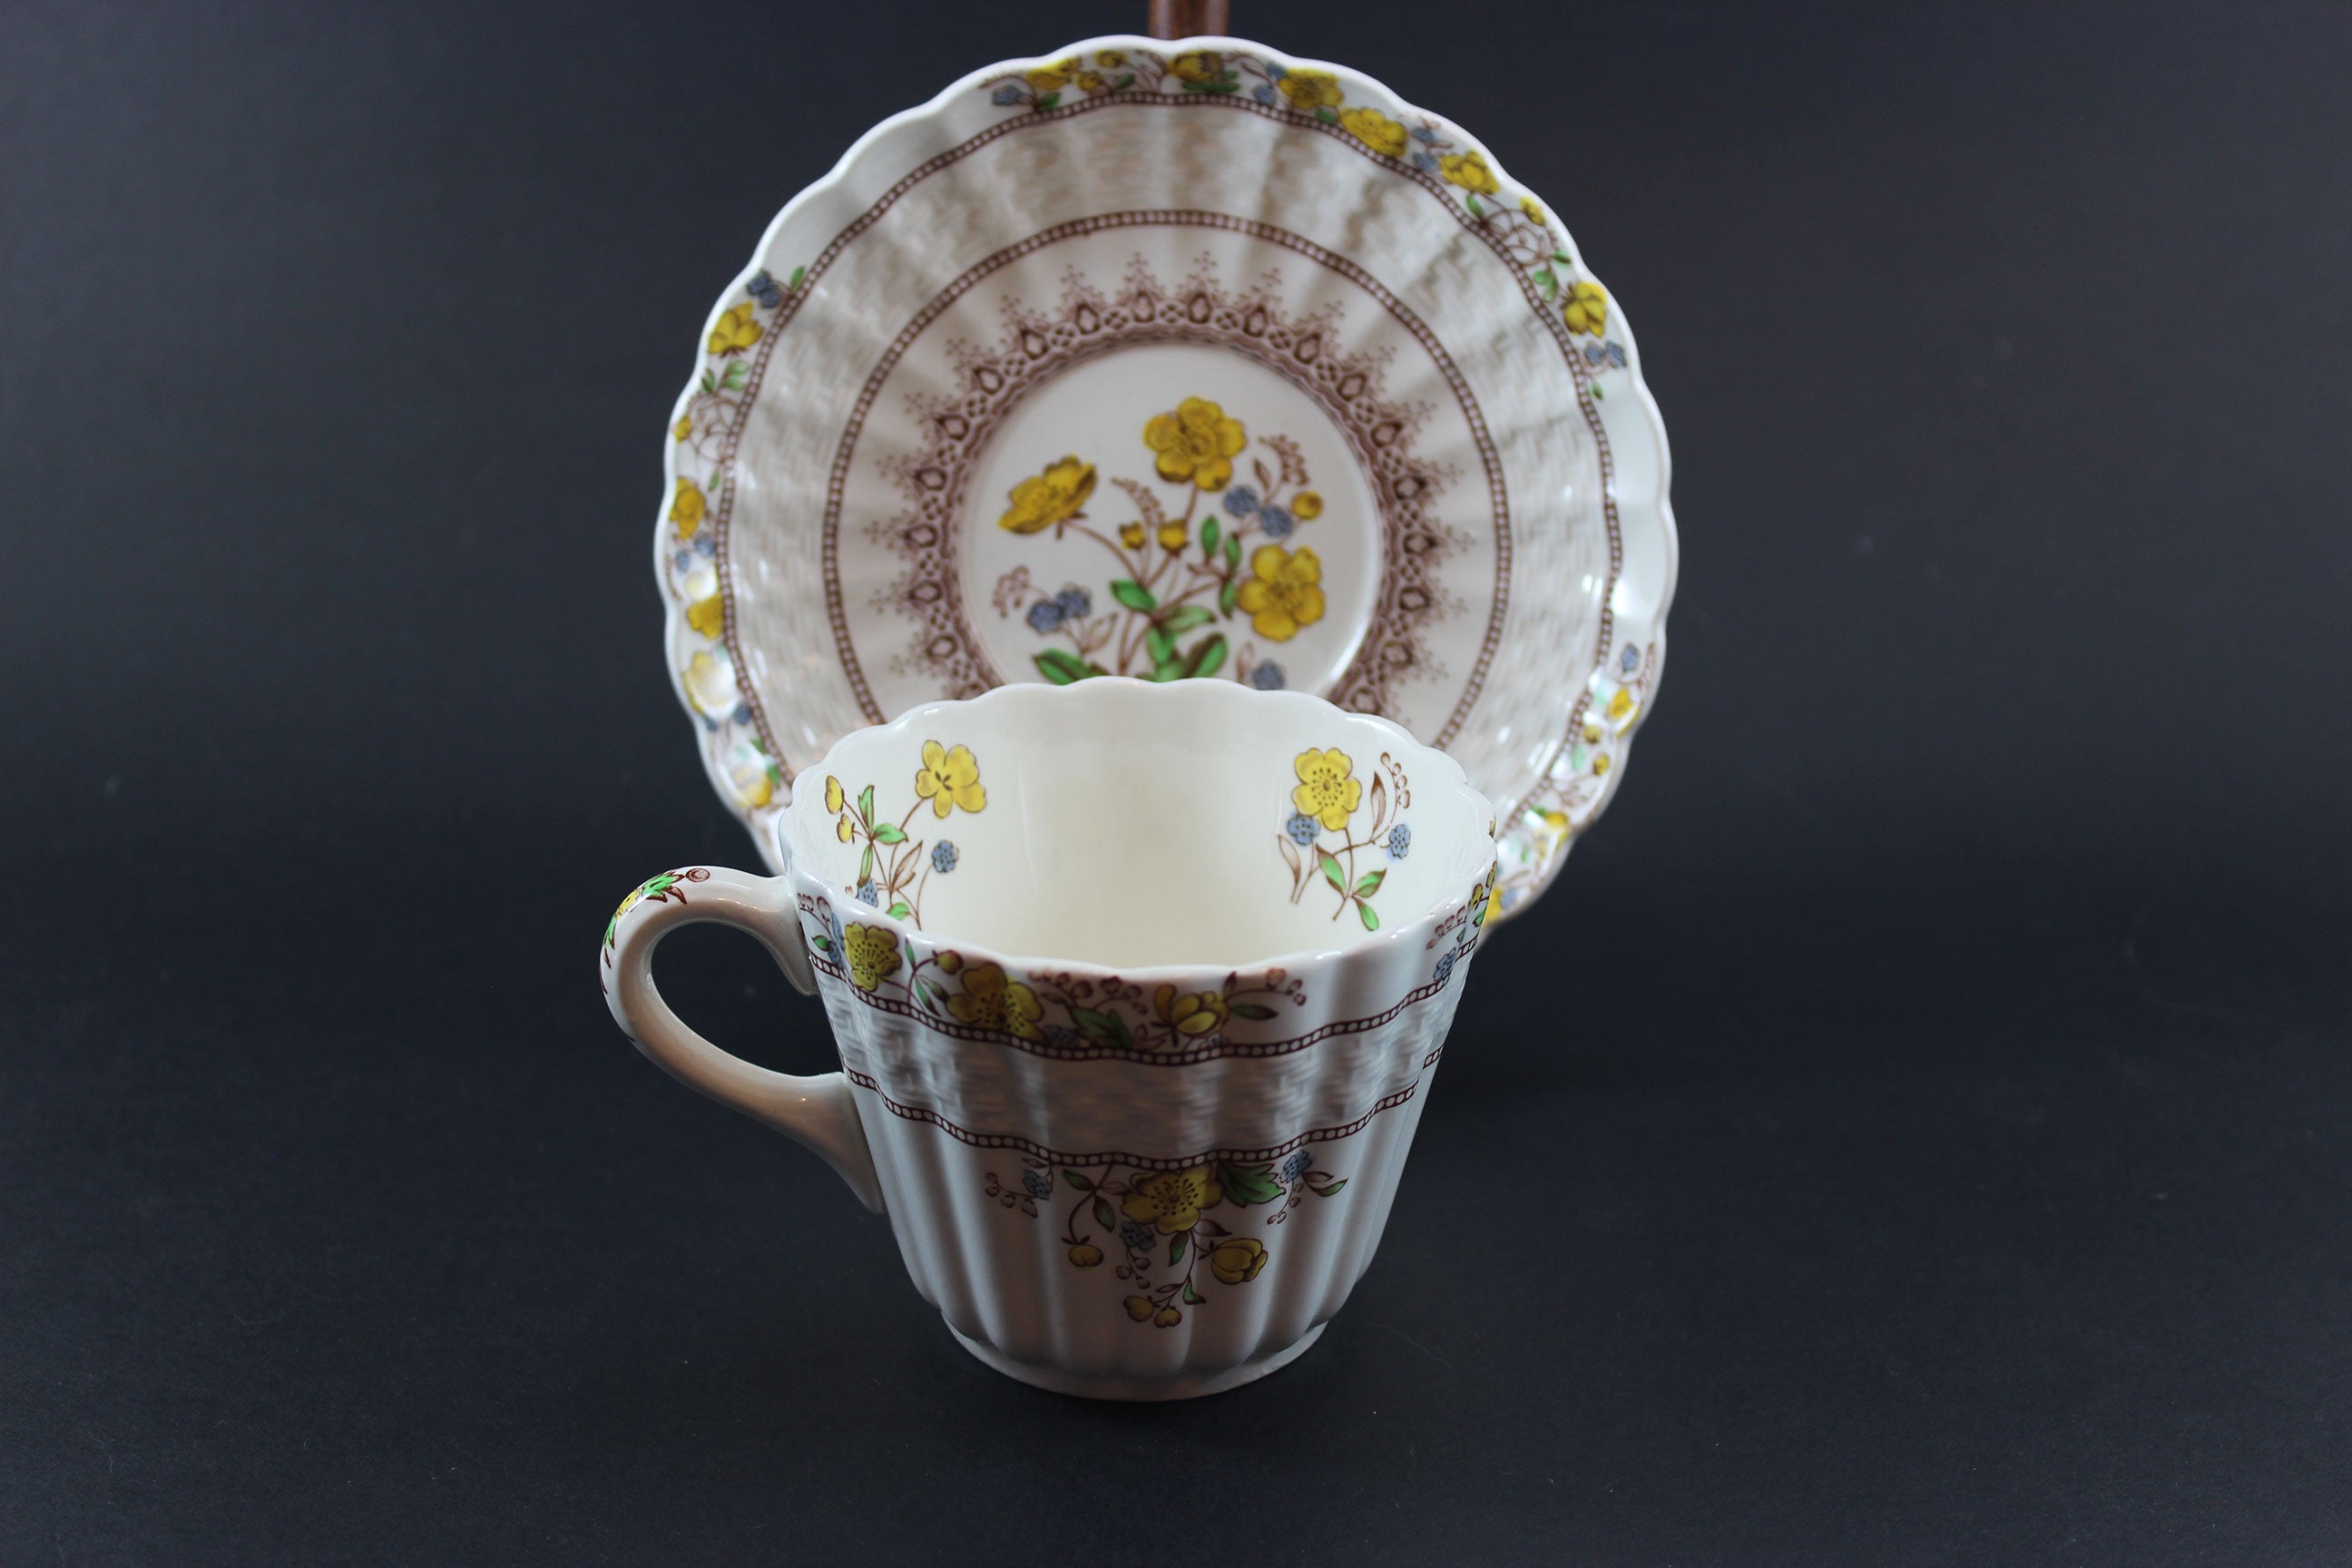 Copeland Spode, Buttercup Pattern, Teacups and Saucers